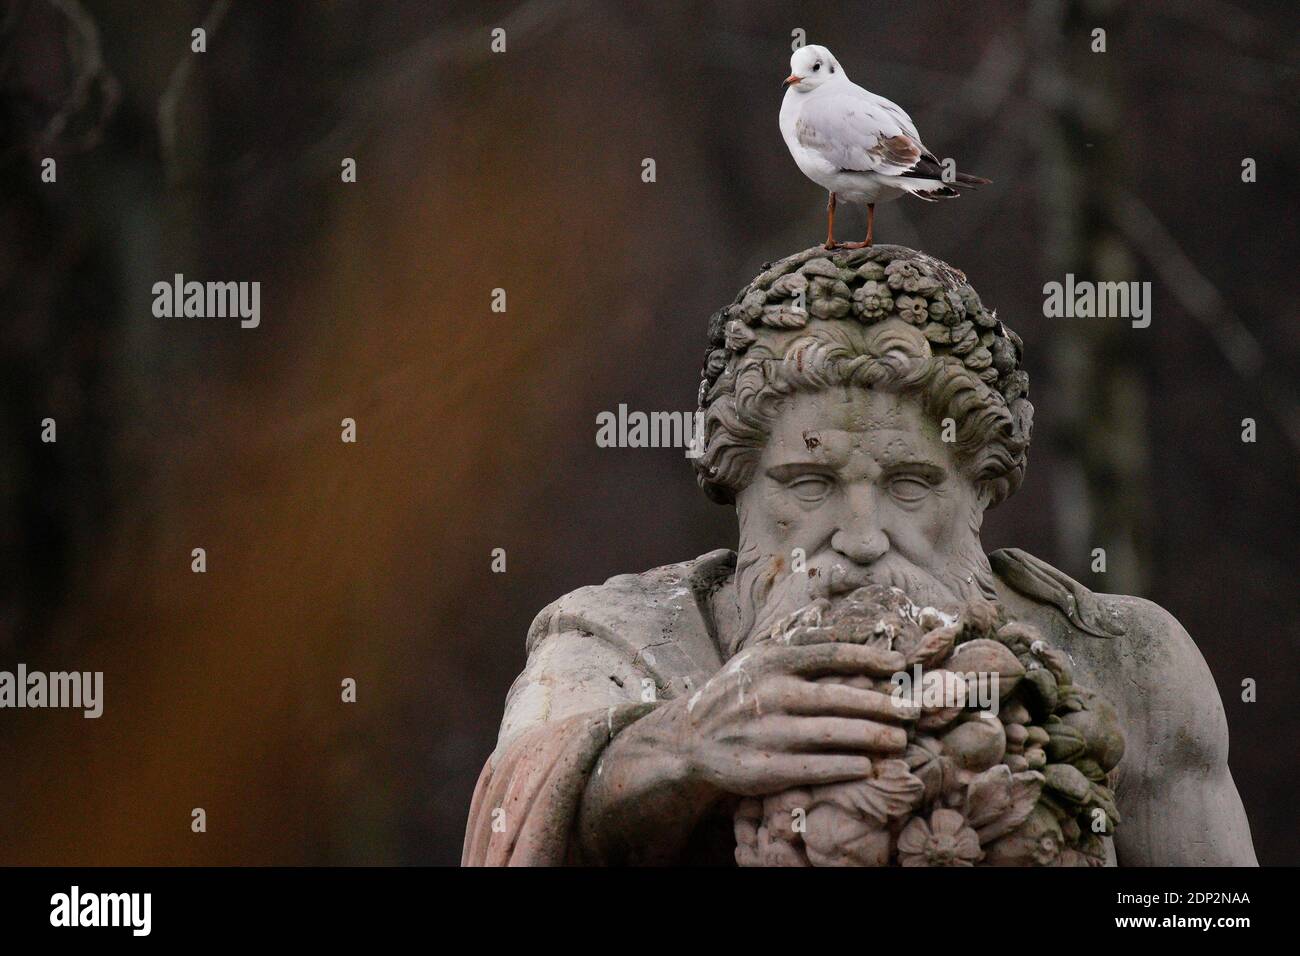 A seagull is seen sitting on a sculpture in the Royal Baths Park in Warsaw, Poland on December 18, 2020. Stock Photo